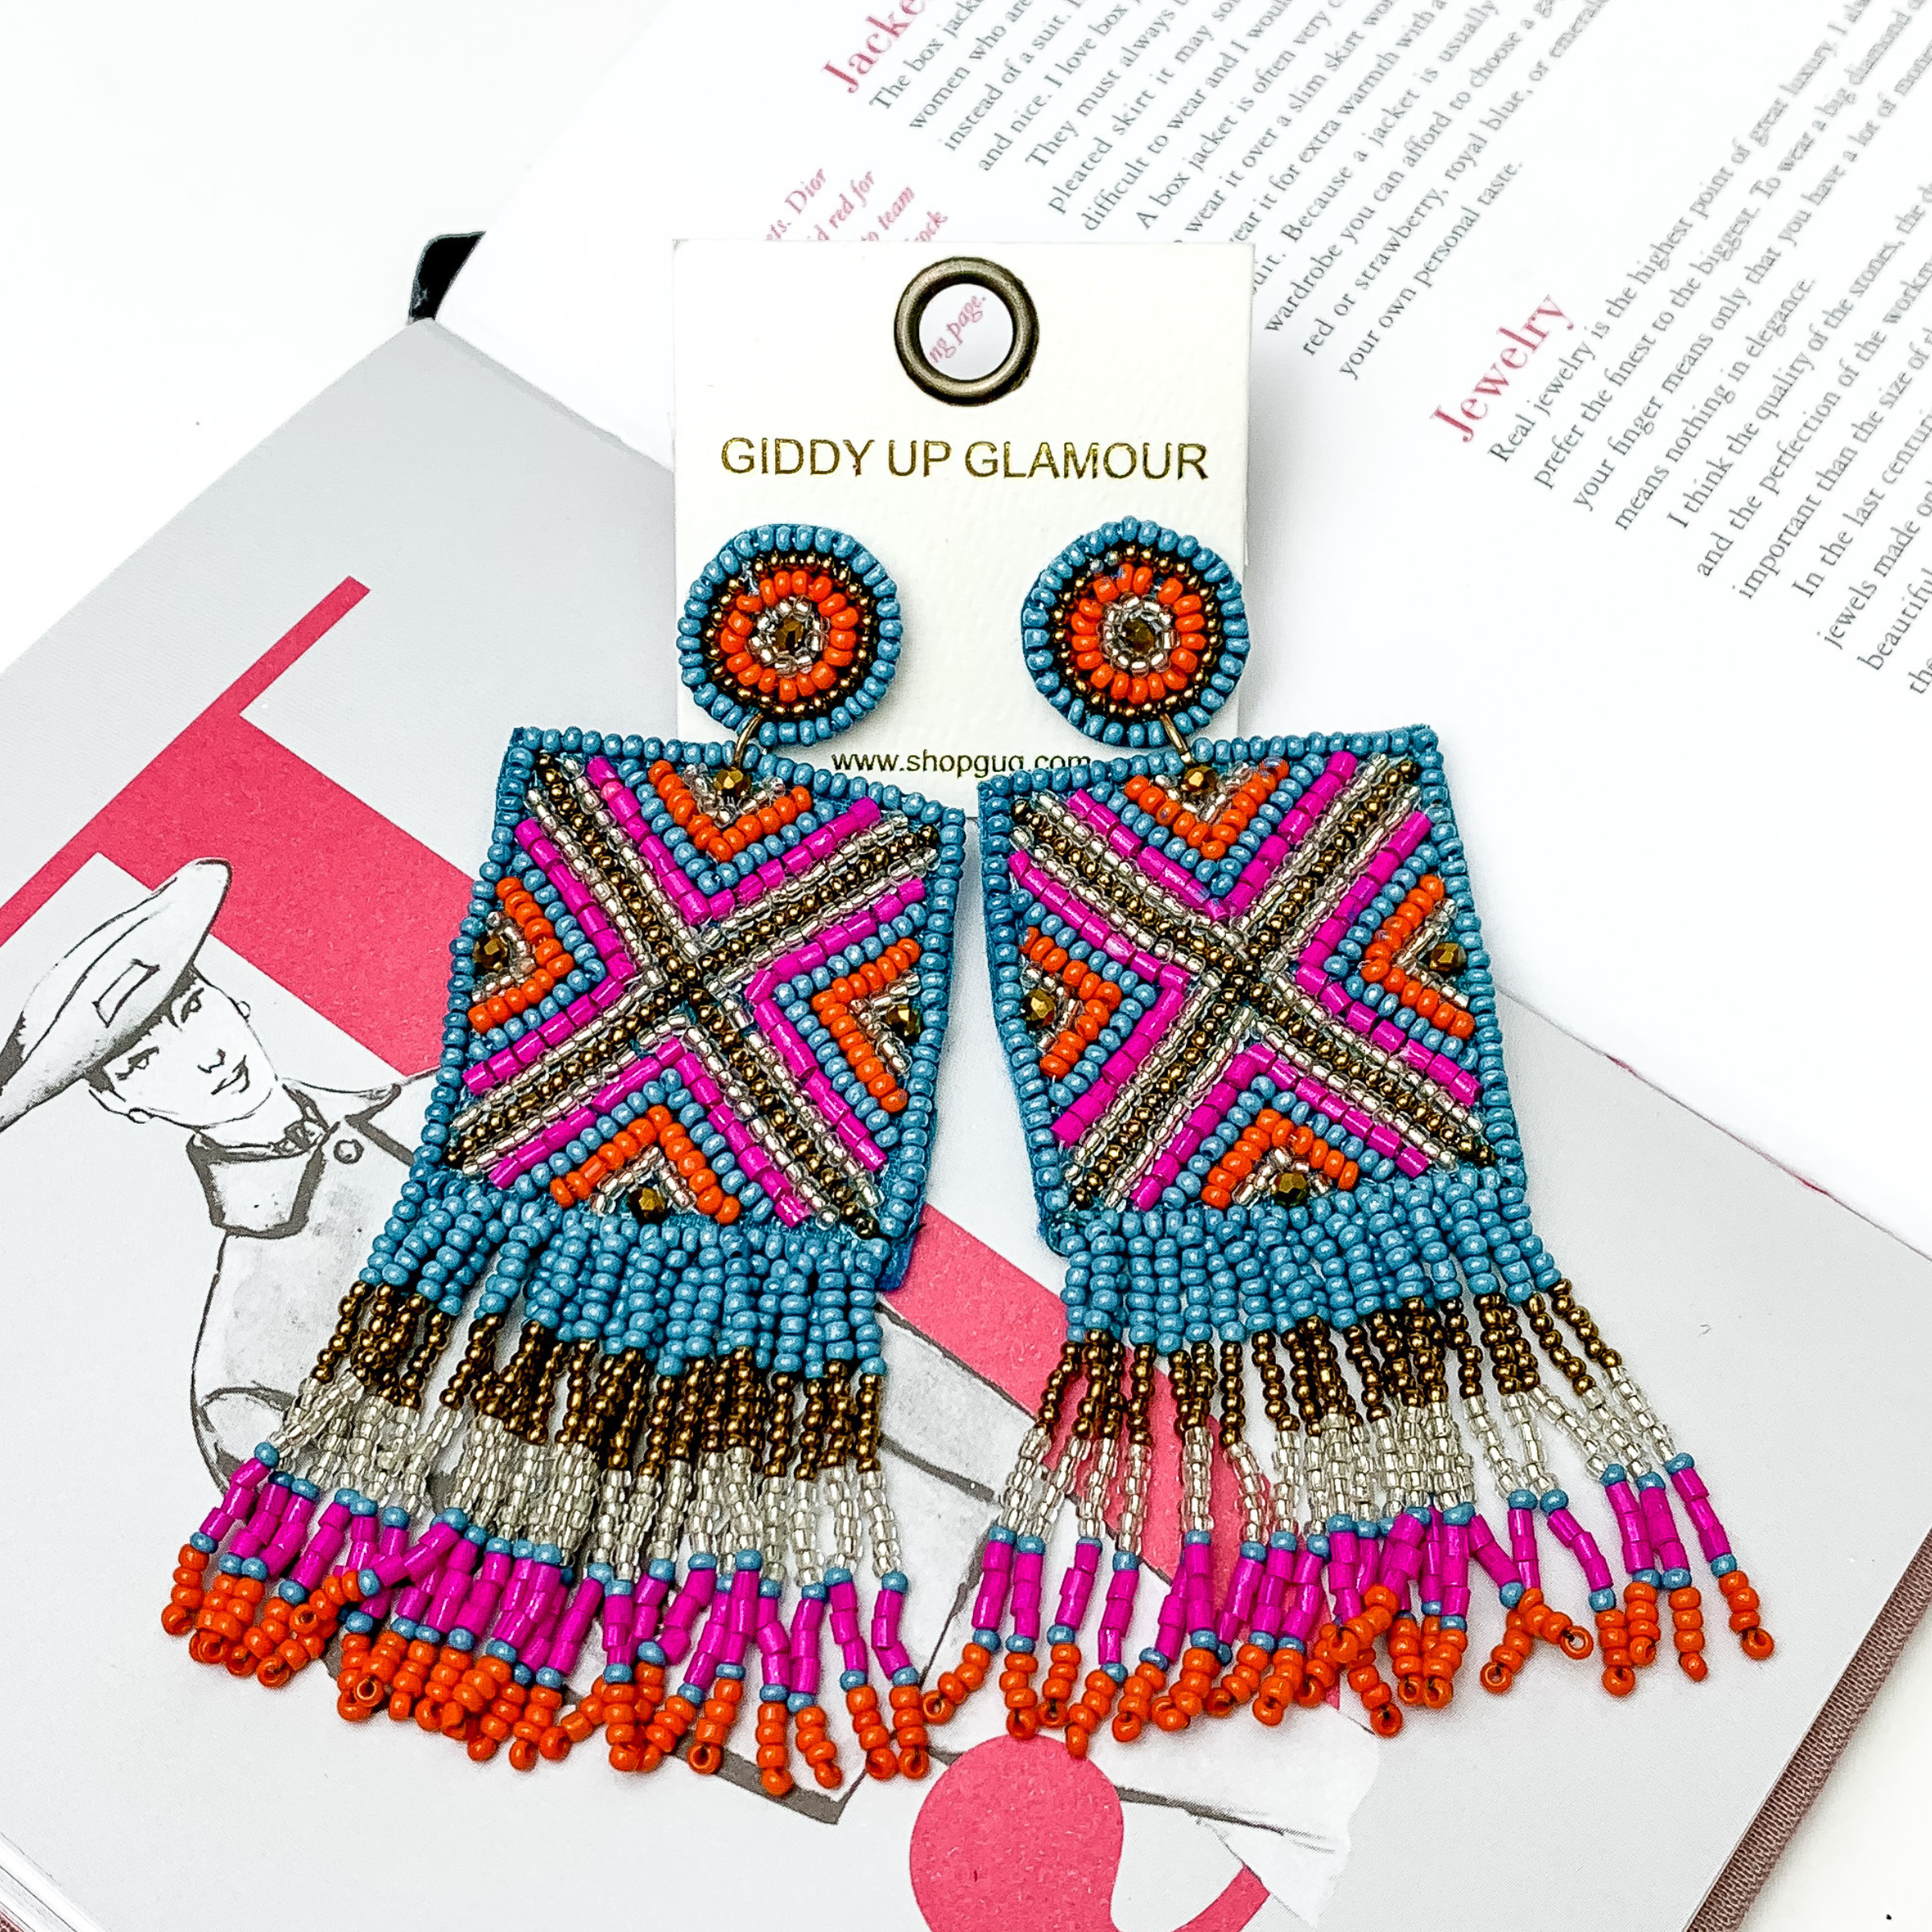 These are circle post back, beaded earrings with a beaded square drop that has fringe on the bottom side of the square. These earrings include blue beads, fuchsia pink beads, orange beads and gold beads. These earrings are pictured on top of an open book on a white background. 